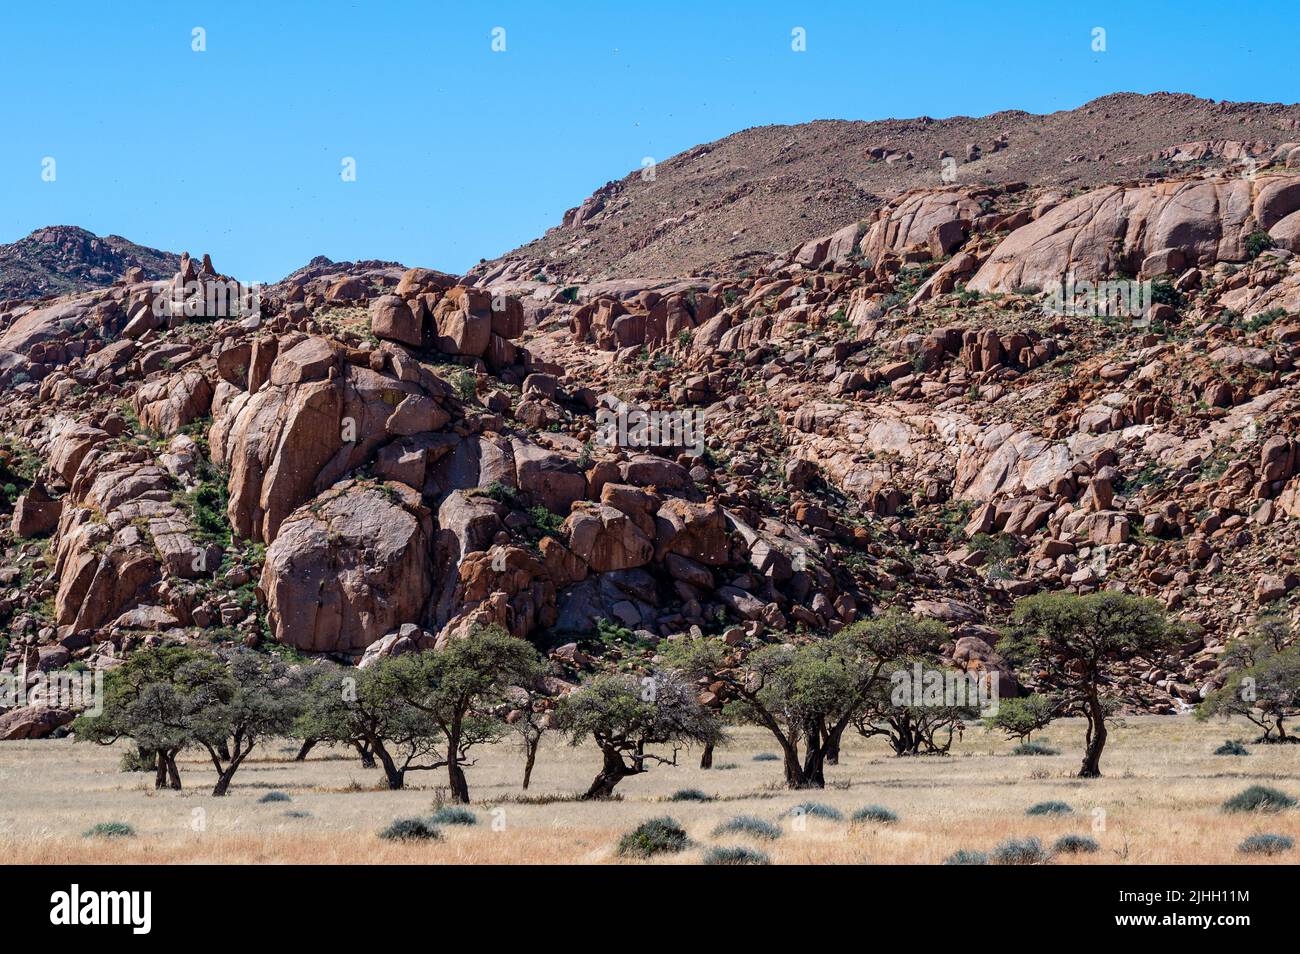 Namibian the rocks of SpitzkopTrees and mountains in the Namtib in Namibia Africape in Damaraland, landscape with a tree Stock Photo